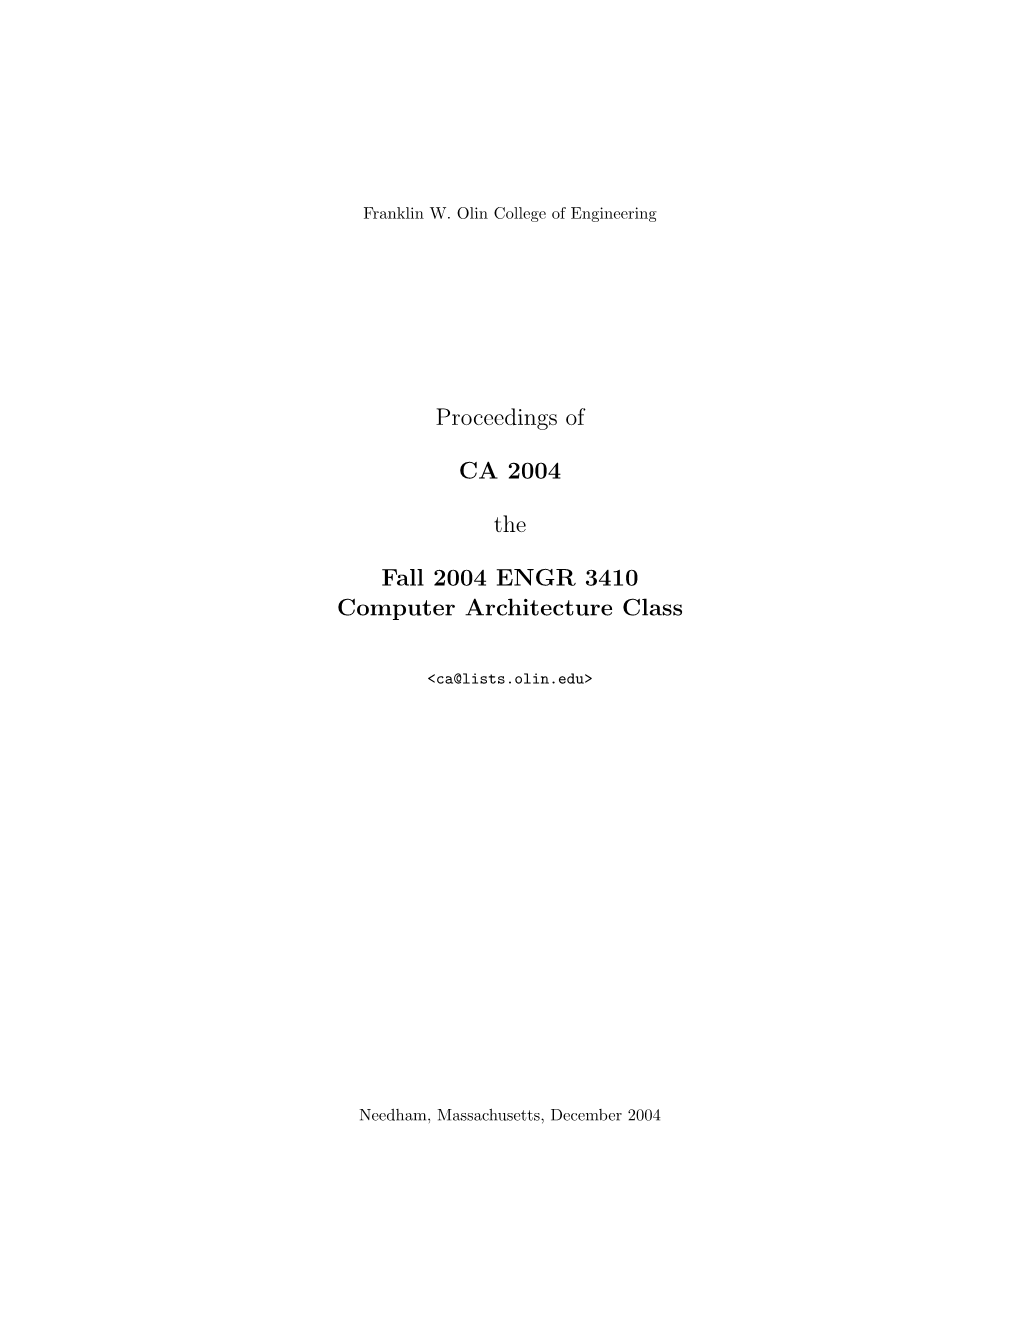 Proceedings of CA 2004 the Fall 2004 ENGR 3410 Computer Architecture